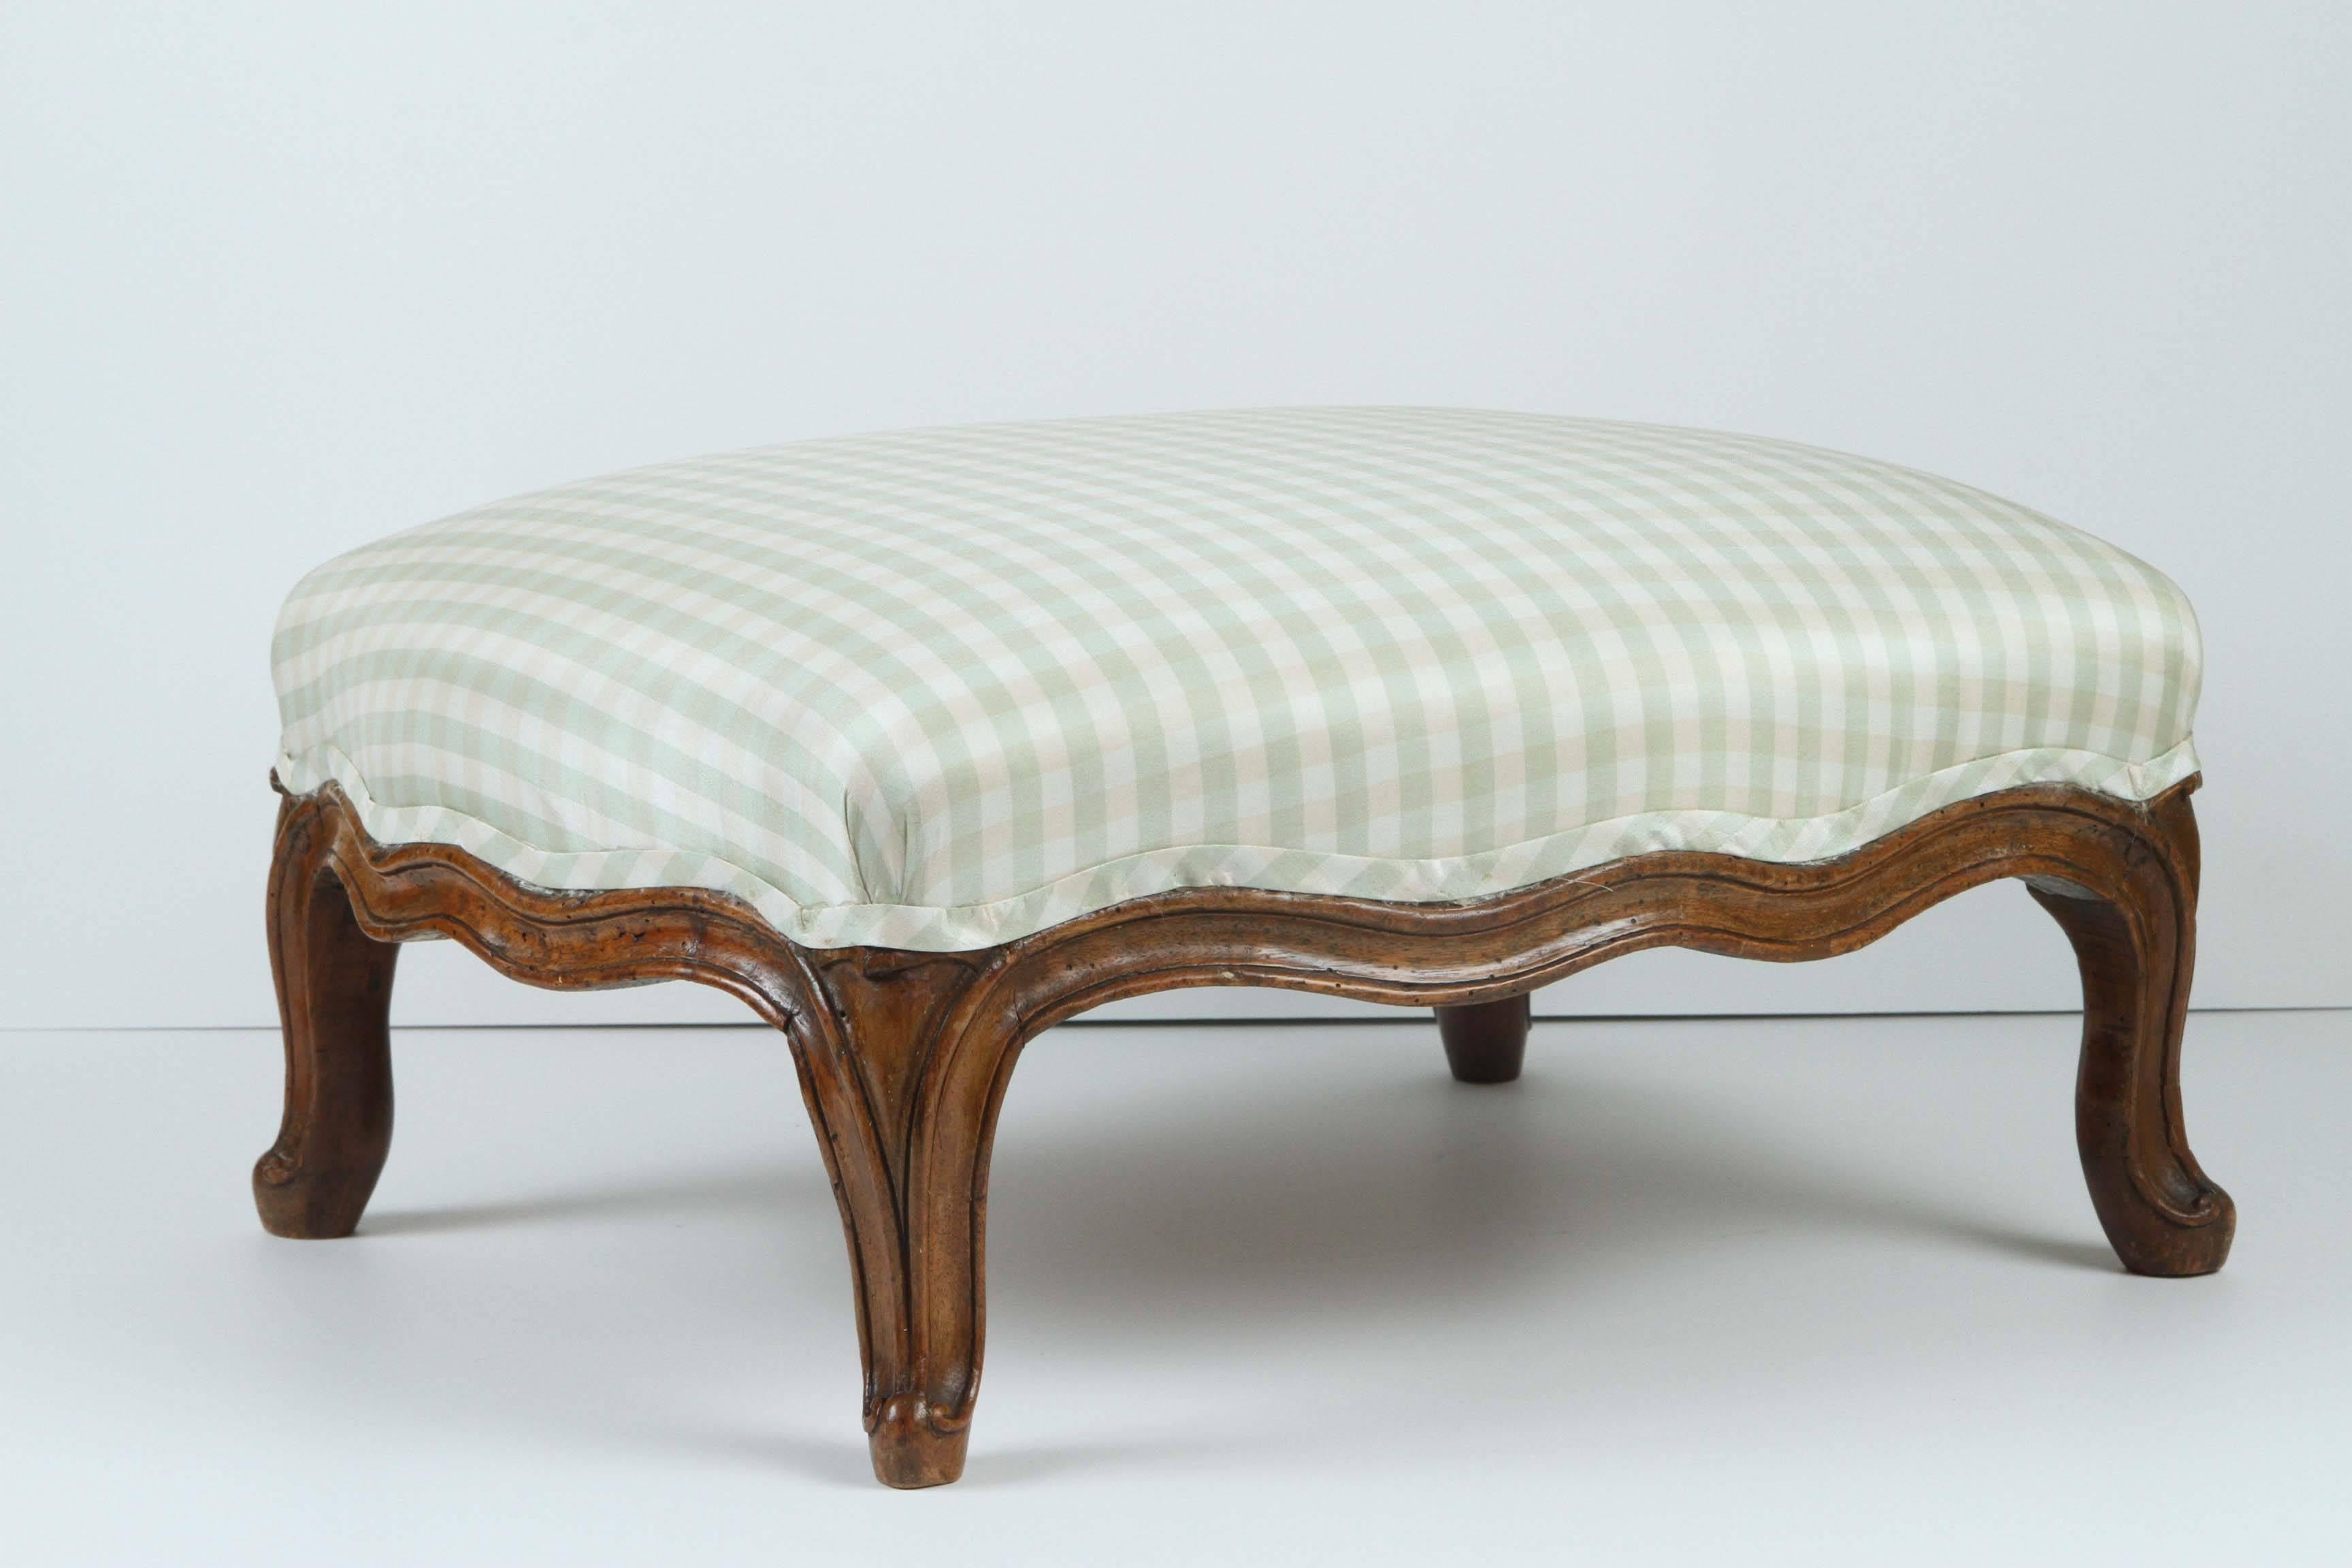 Carved French Louis XV Footstool, 18th Century